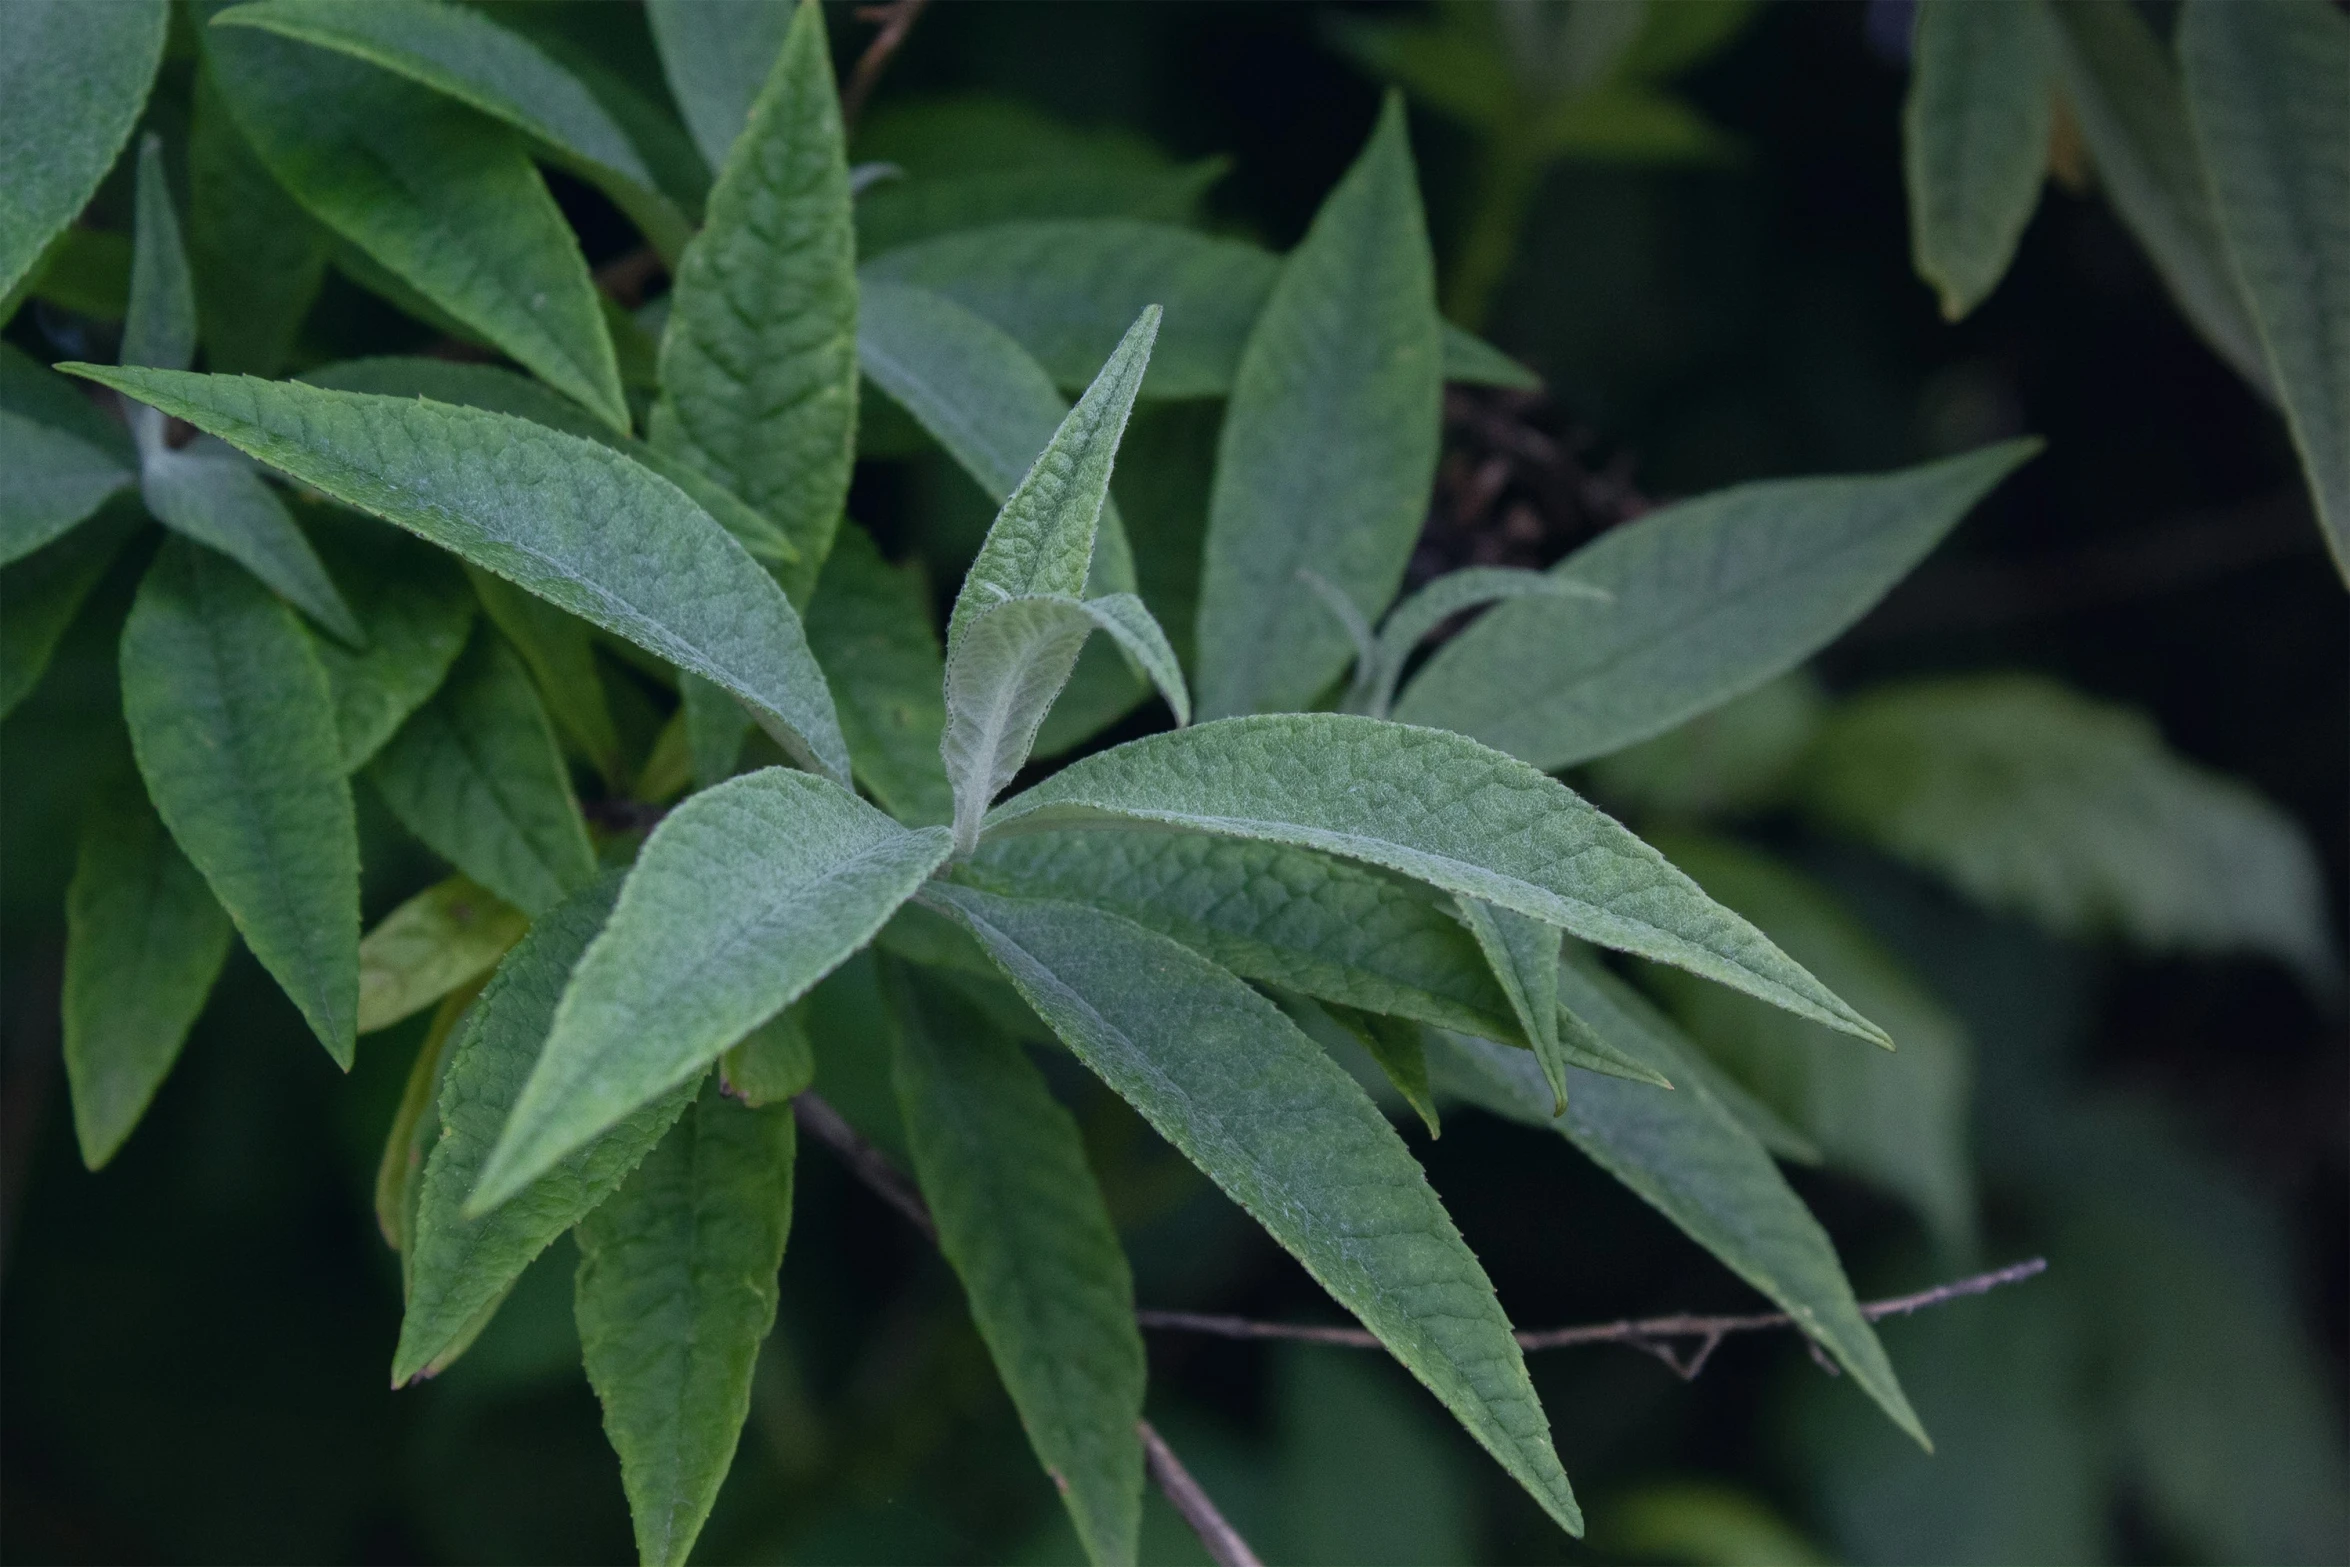 a close - up view of leaves on a plant